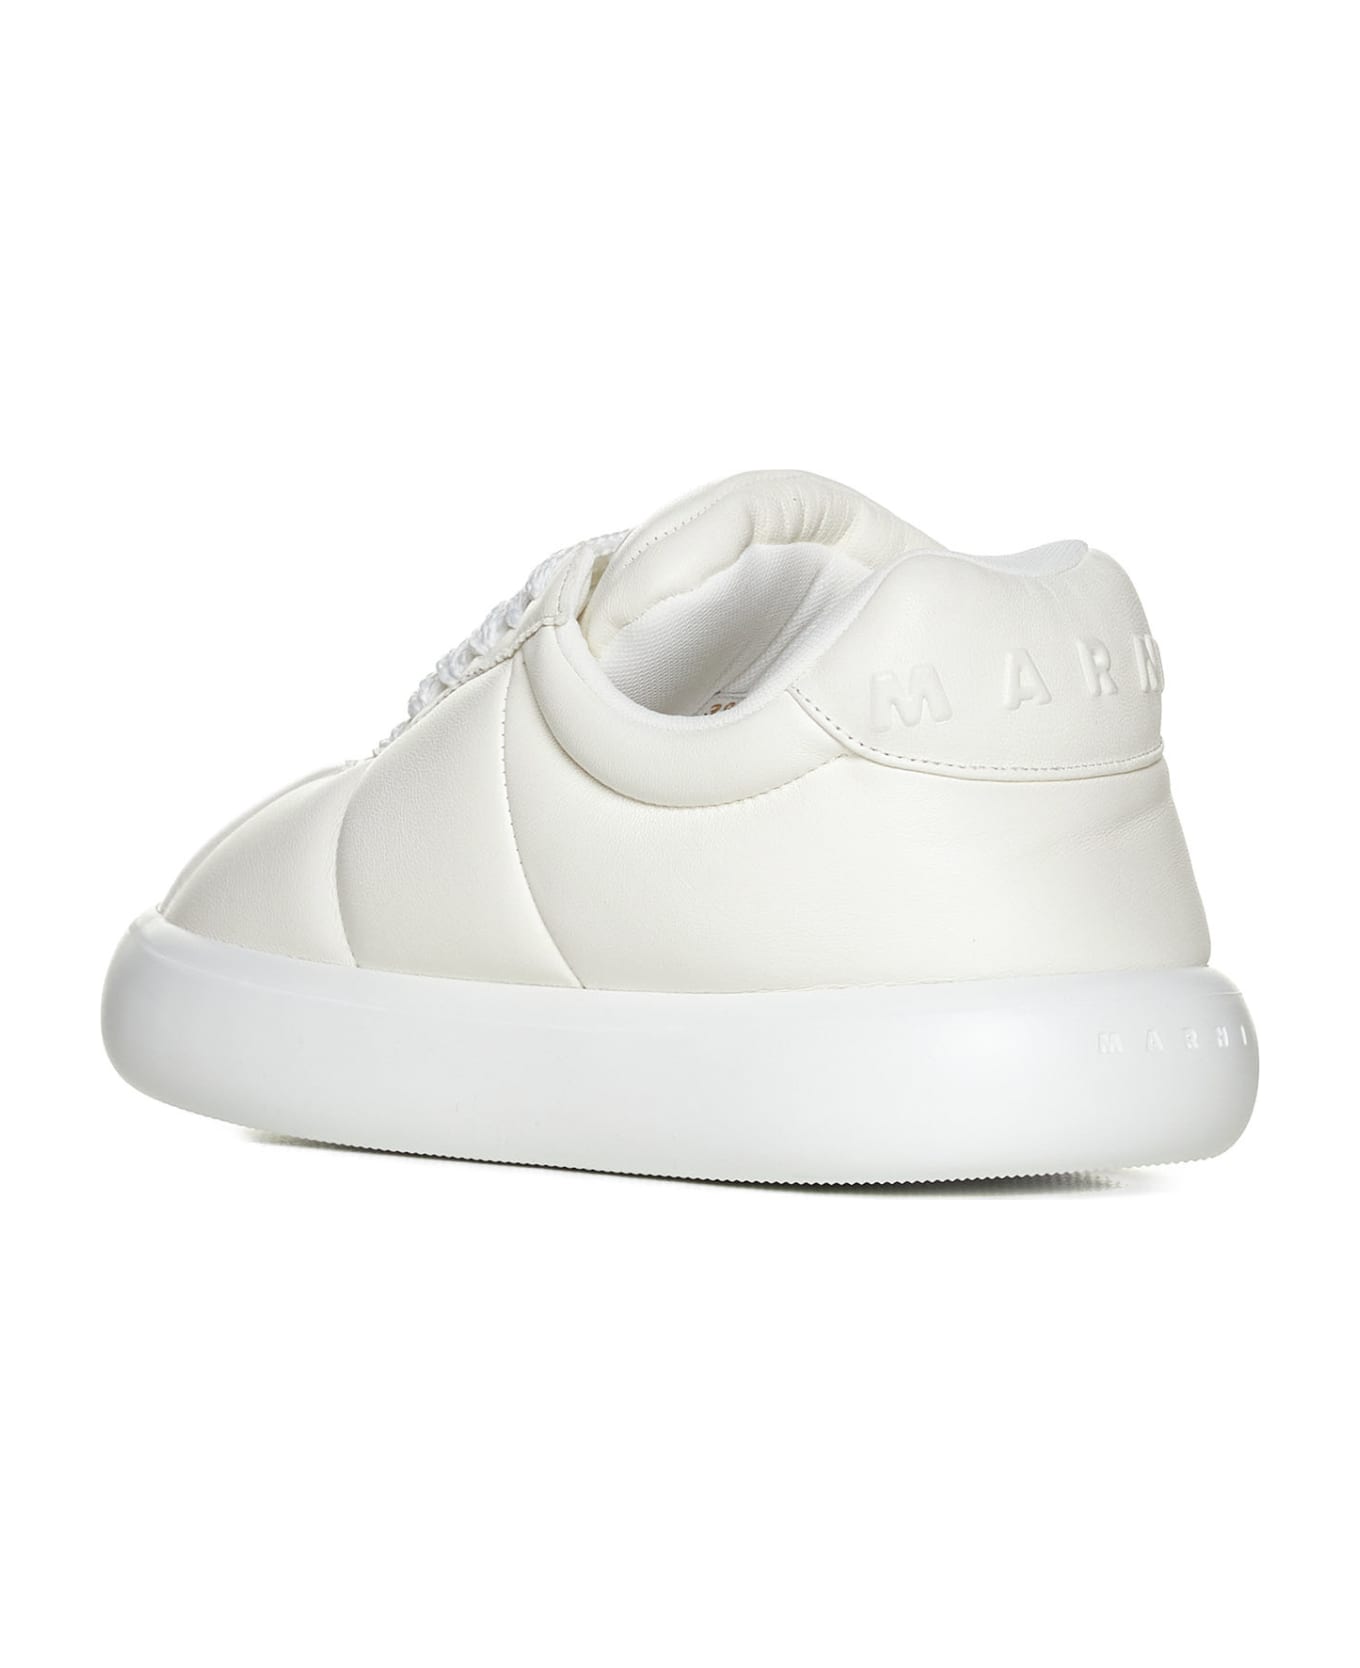 Marni Sneakers - Lily white